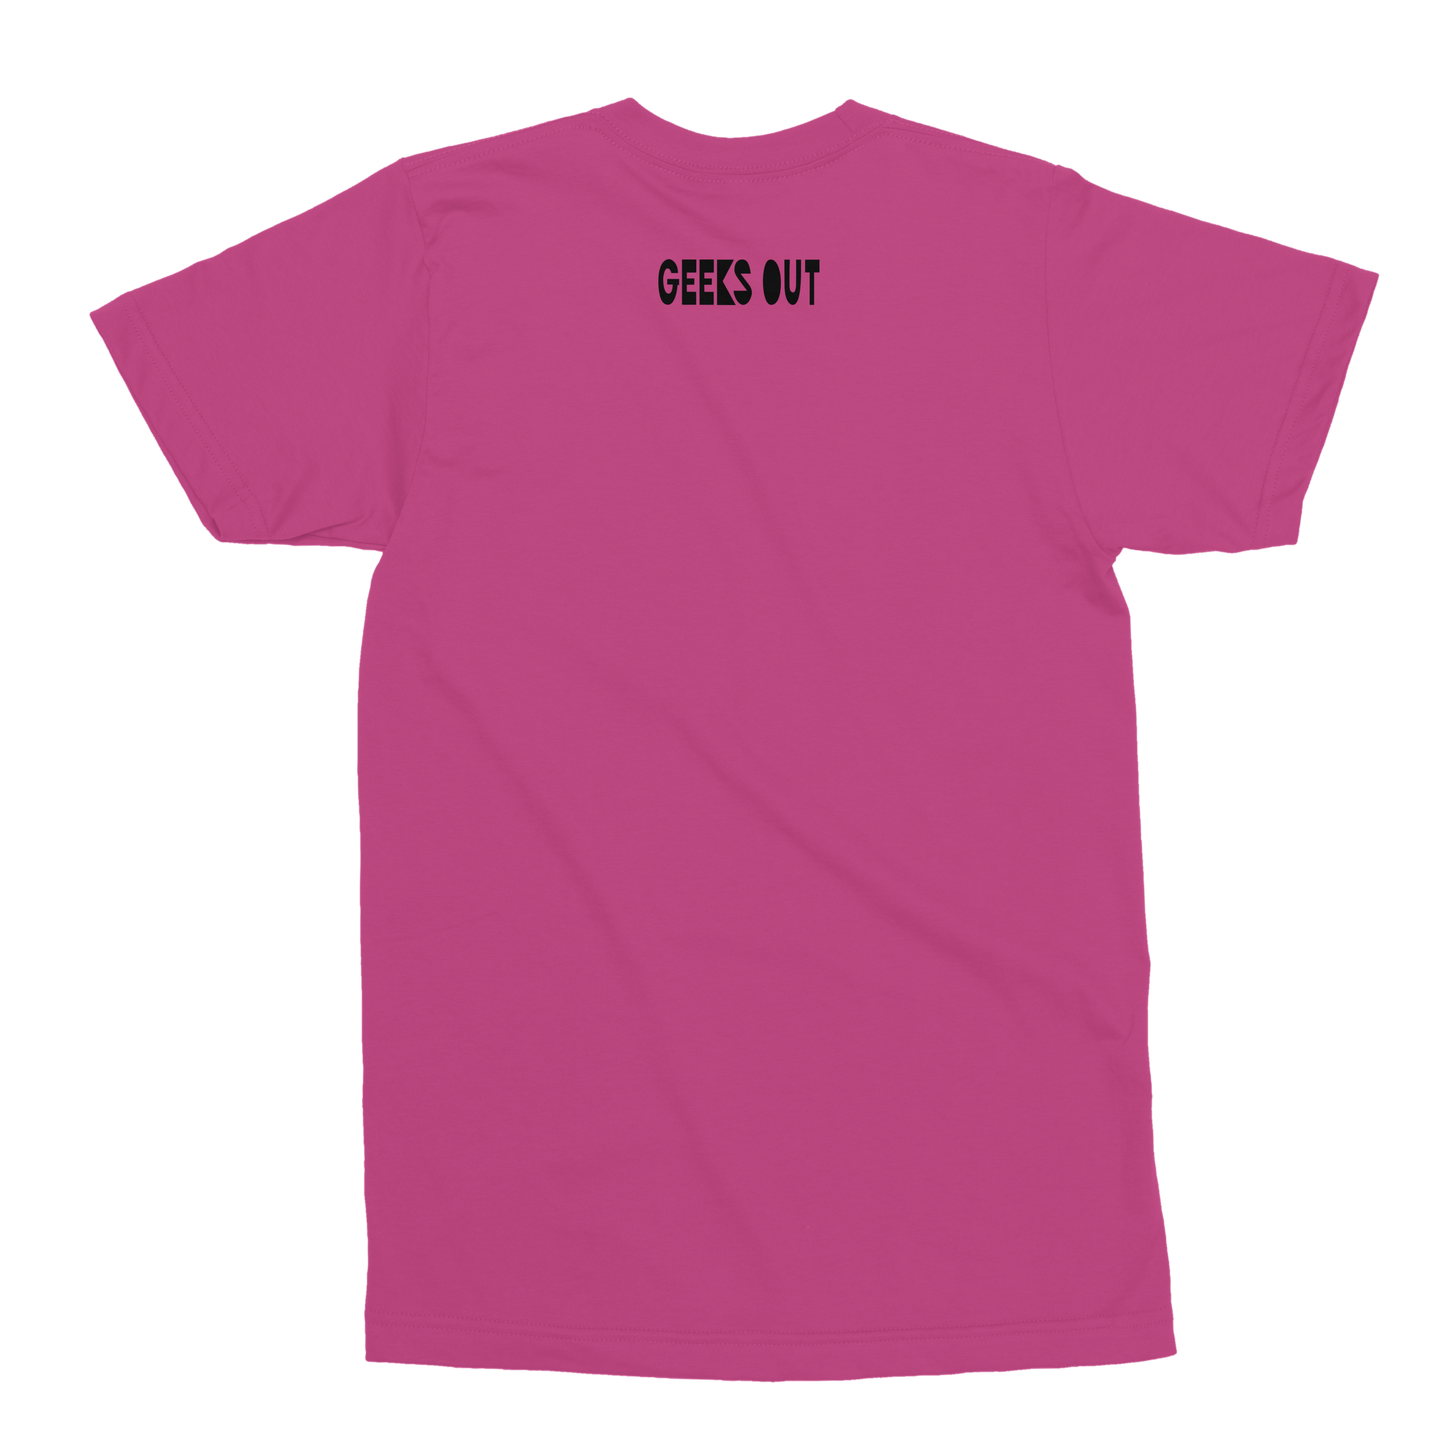 Strong Female Character Pink T-shirt